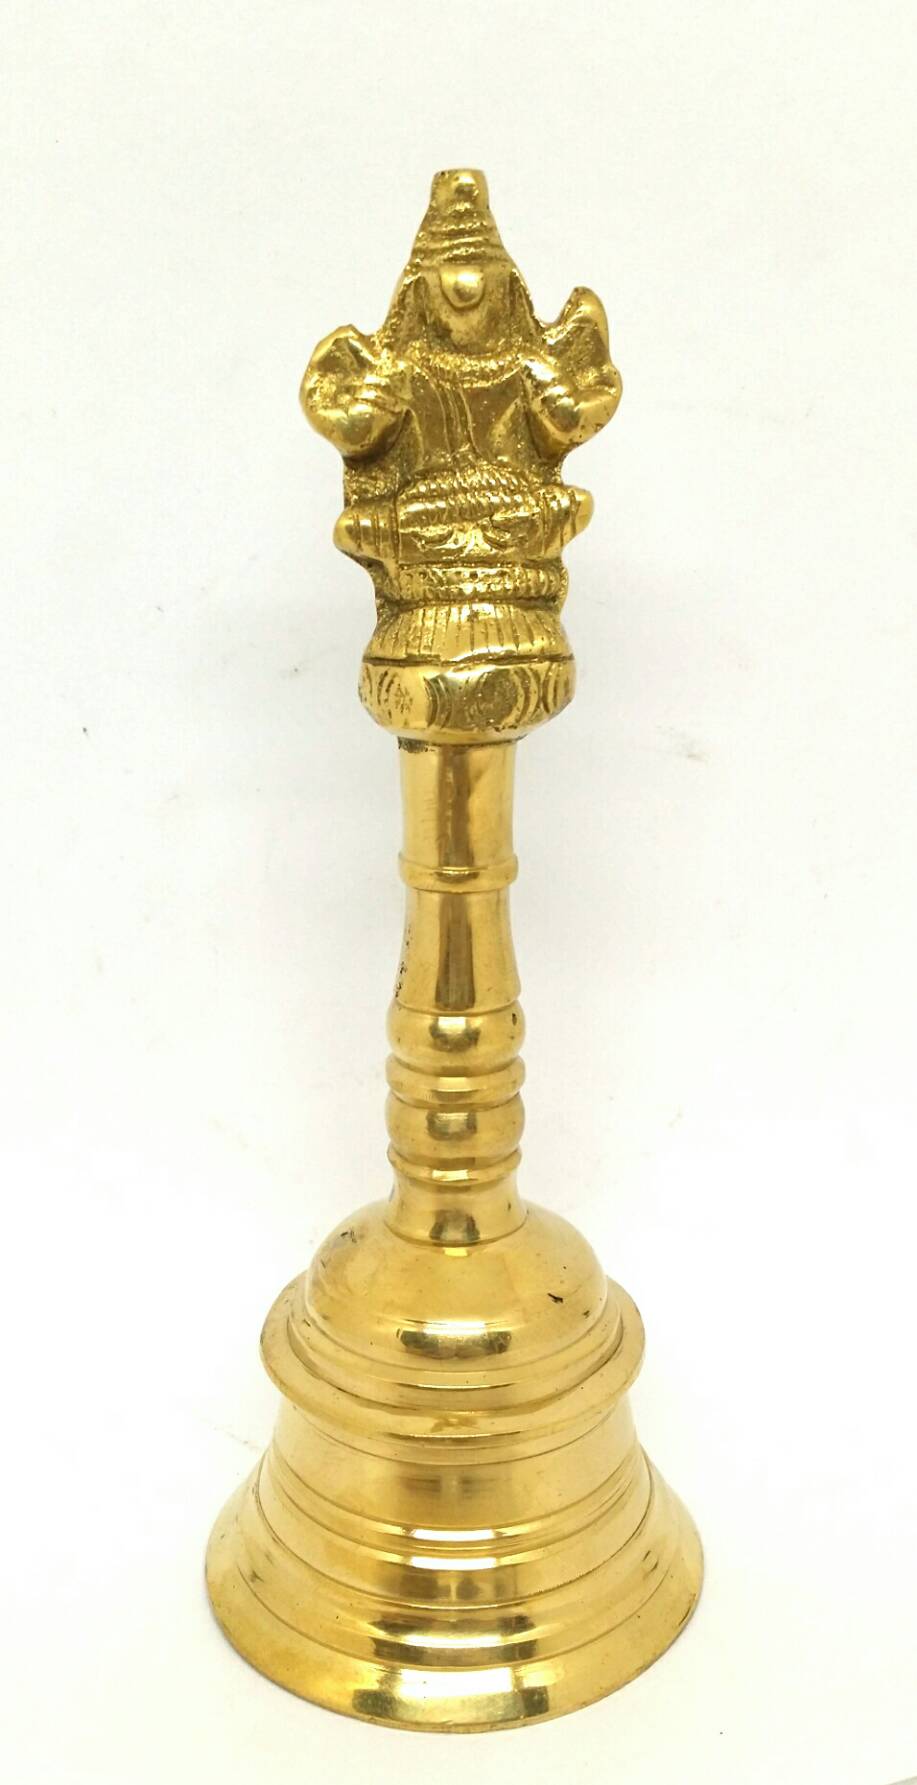 ٻҾ2 ͧԹ : HB023 д觷ͧͧ Թ ҧ 2.5  Bronze Bell from India